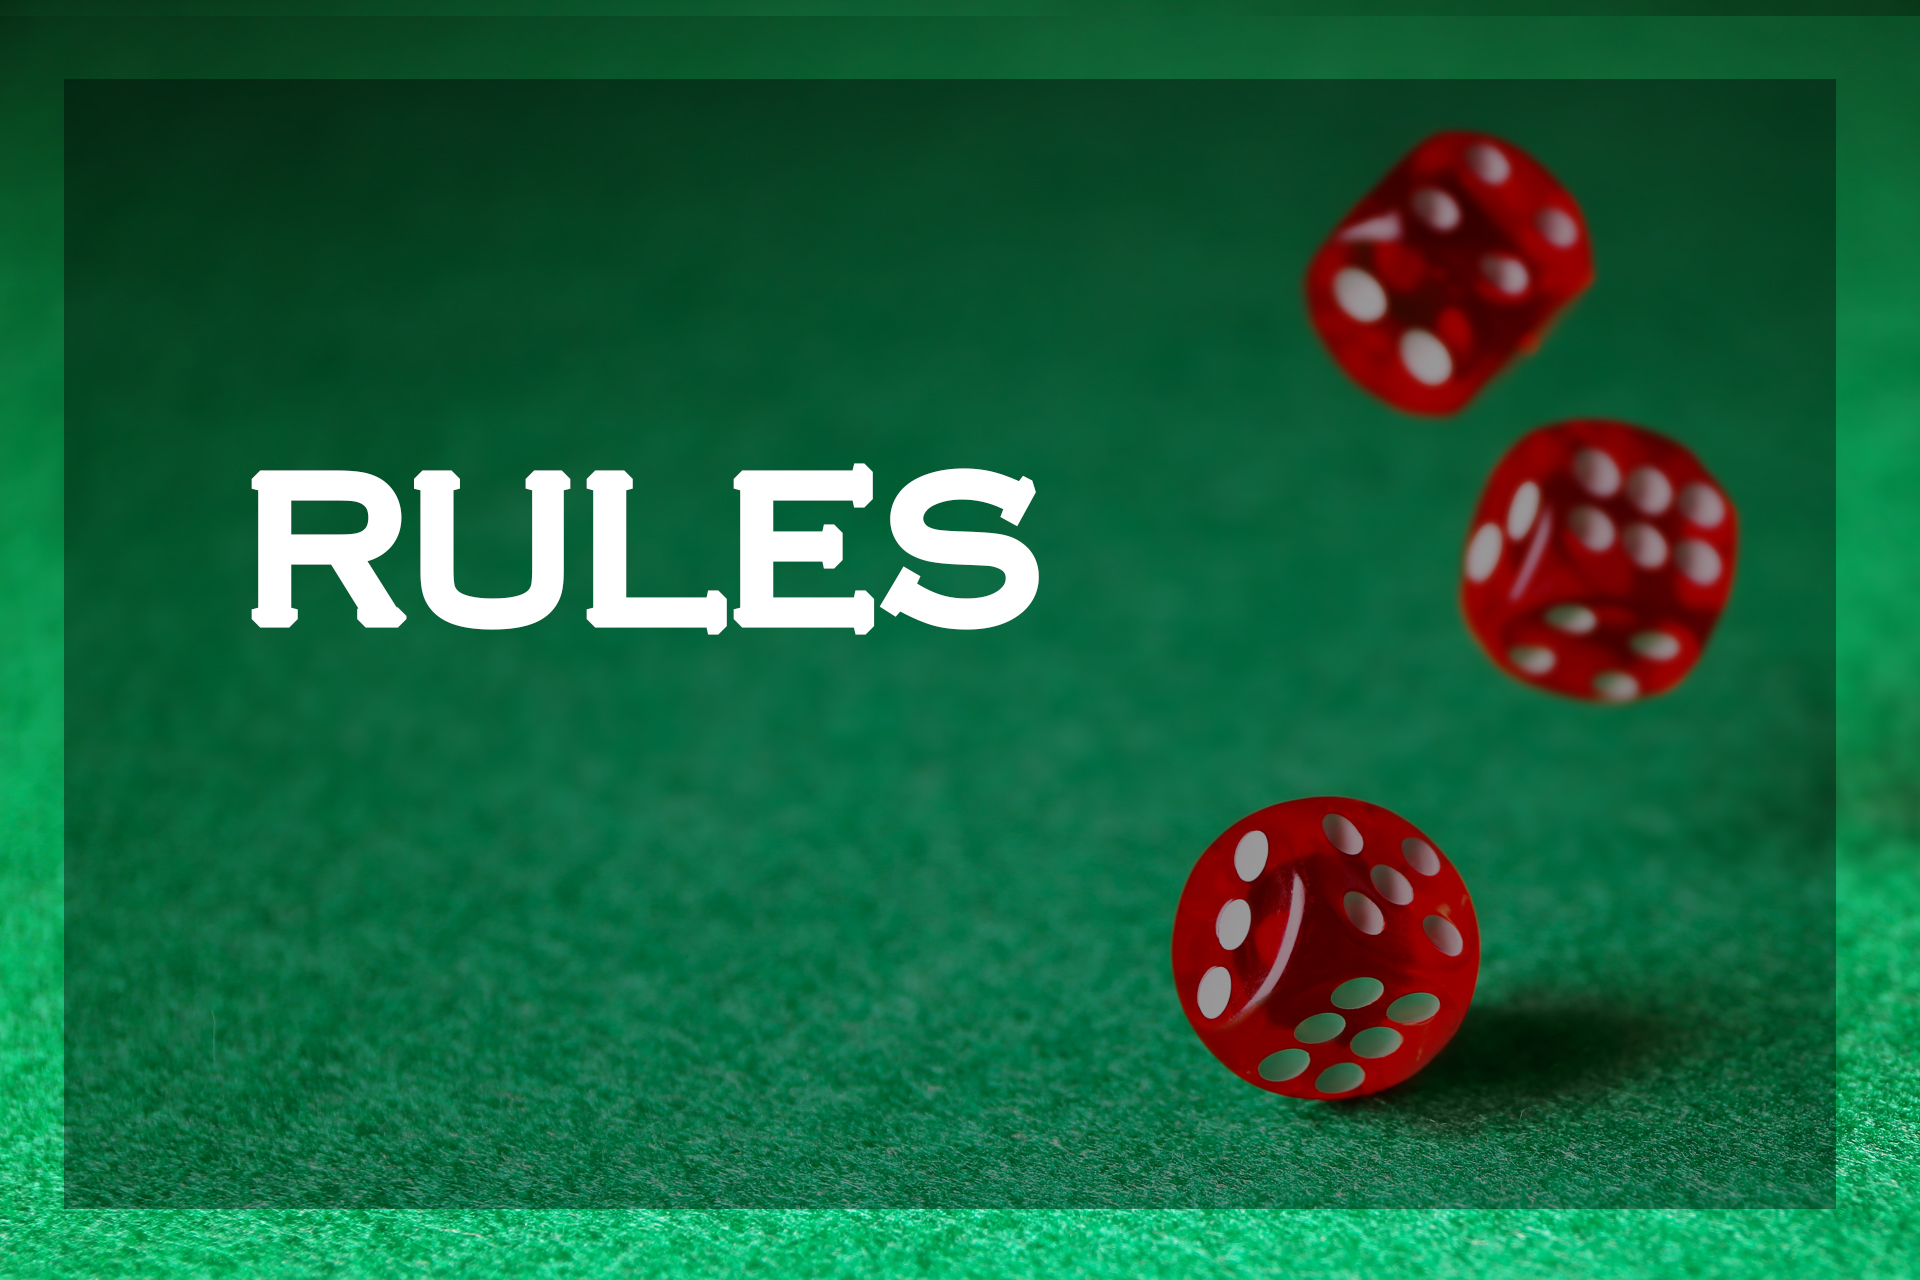 Read rules to avoid mistakes playing craps.